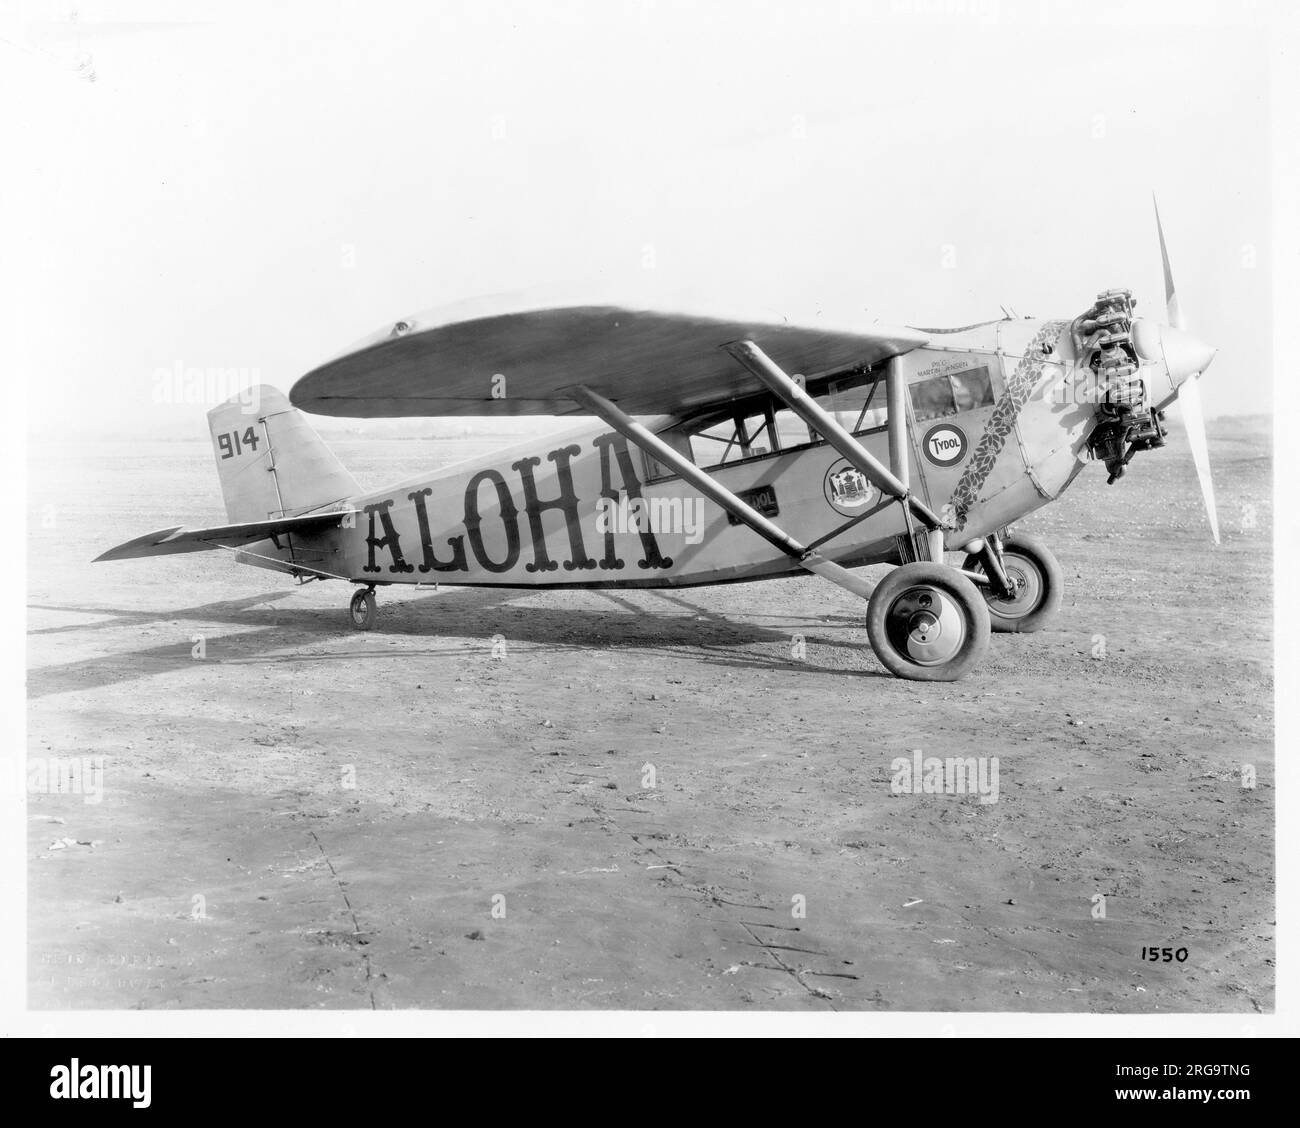 Breese 5 NC914 (msn 3) Aloha, a Dole racer entered by Jack Northrop and flown by Martin Jensen. The Dole Air Race, also known as the Dole Derby, was an air race across the Pacific Ocean from Oakland, California to Honolulu in the Territory of Hawaii held in August 1927, which claimed the lives of ten participants. Stock Photo